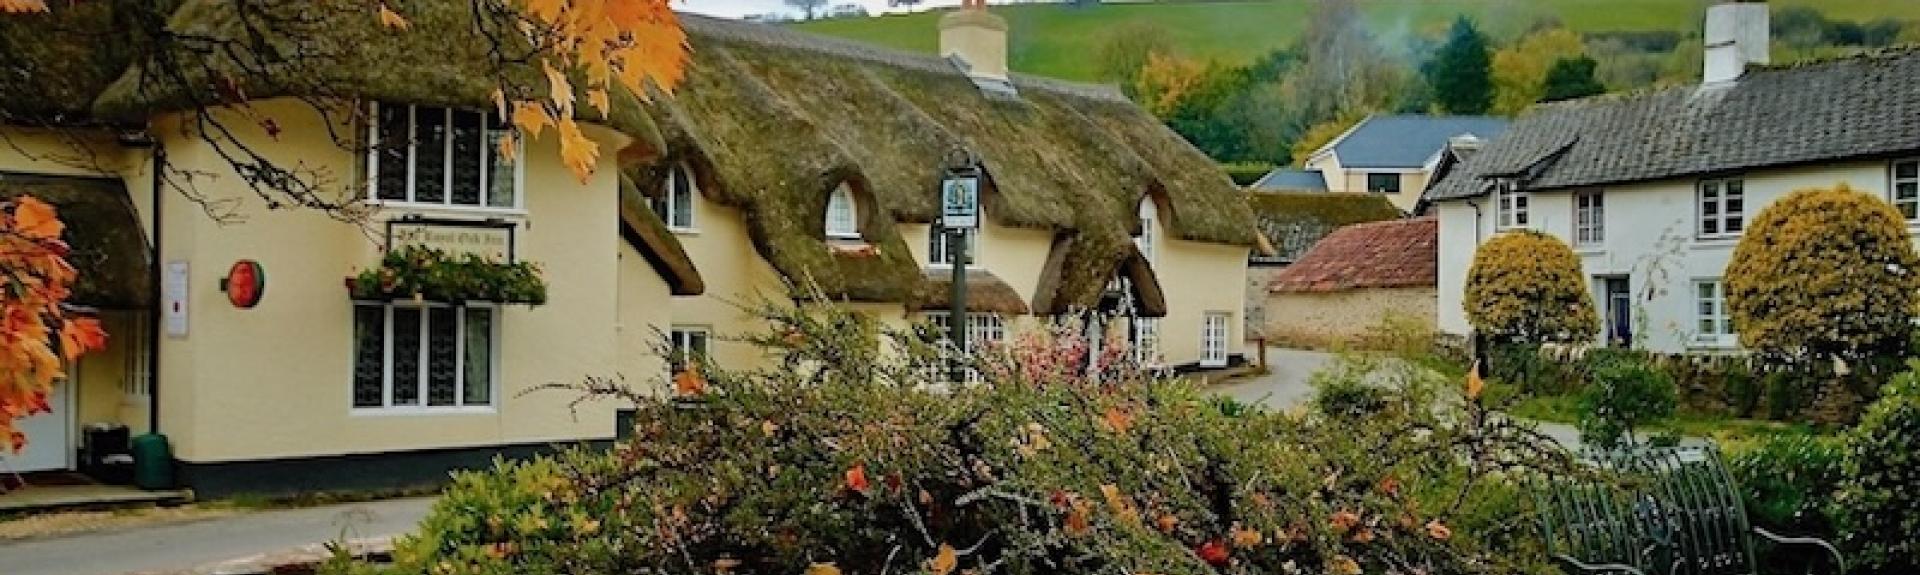 A large thatched Exmoor pub in Winsford is surrounded by trees and bushes in autumn colours.